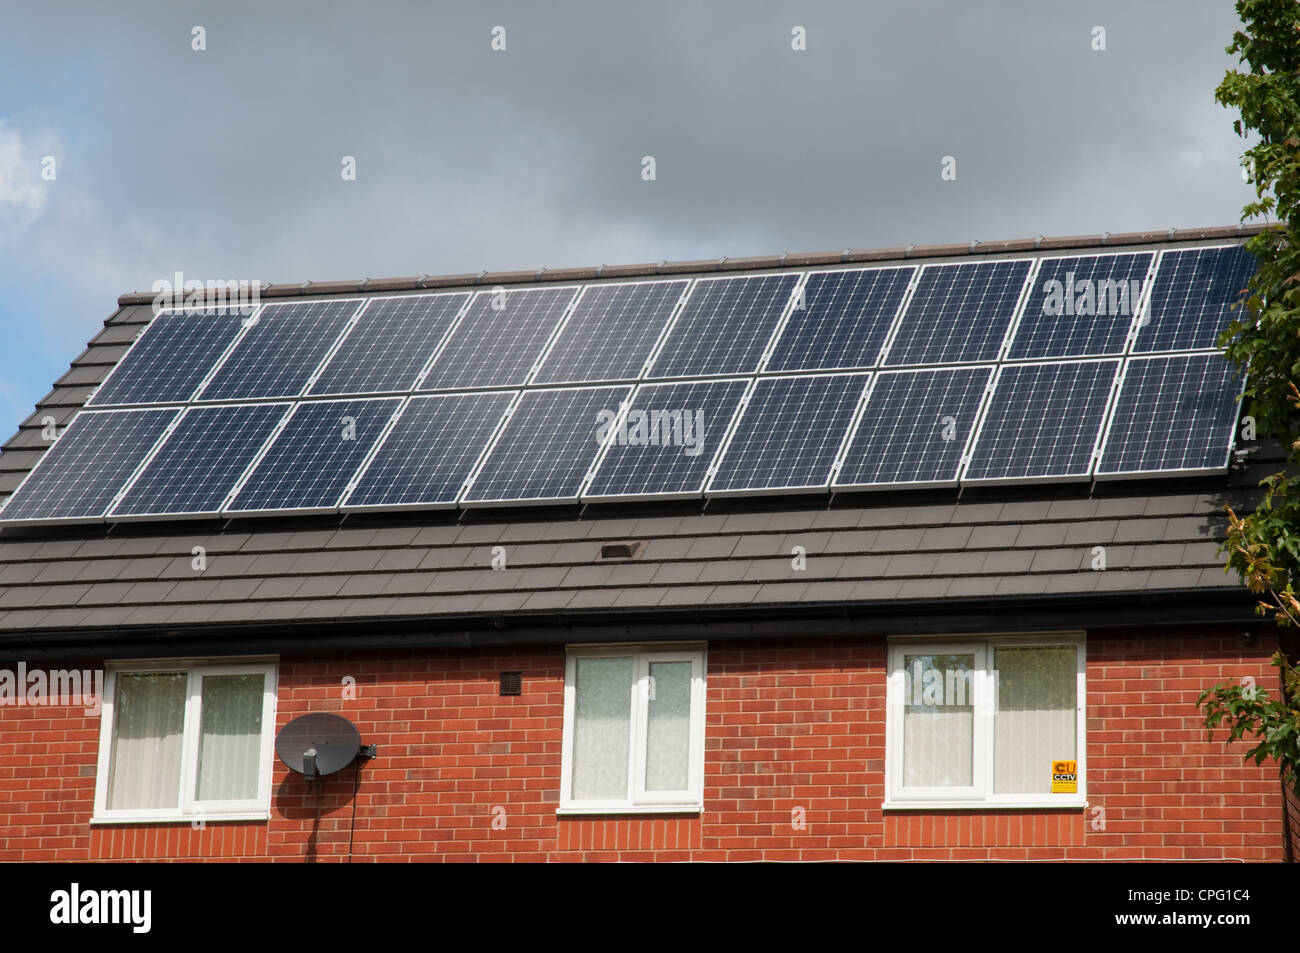 Solar panels on roof of residential property. Stock Photo